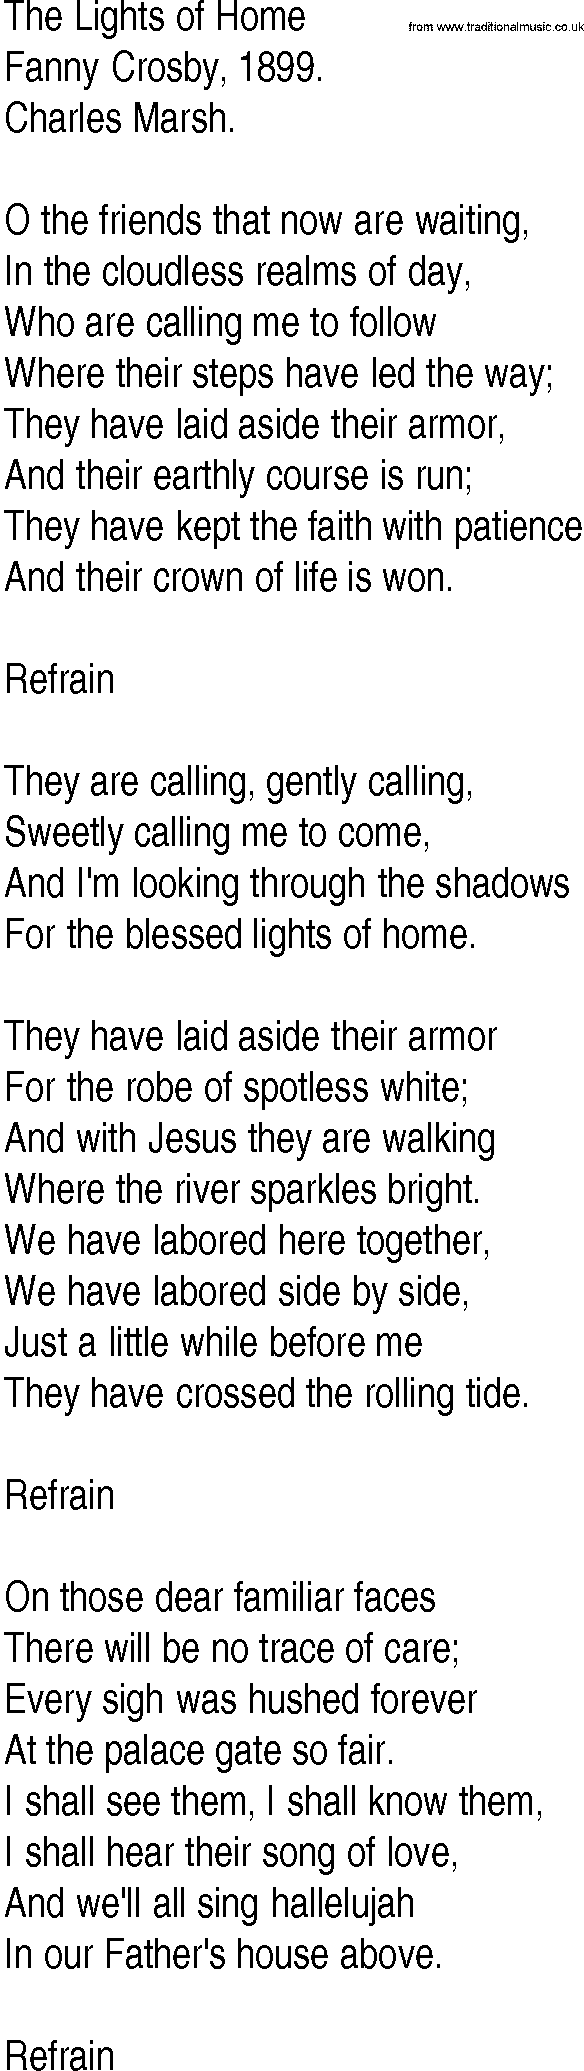 Hymn and Gospel Song: The Lights of Home by Fanny Crosby lyrics